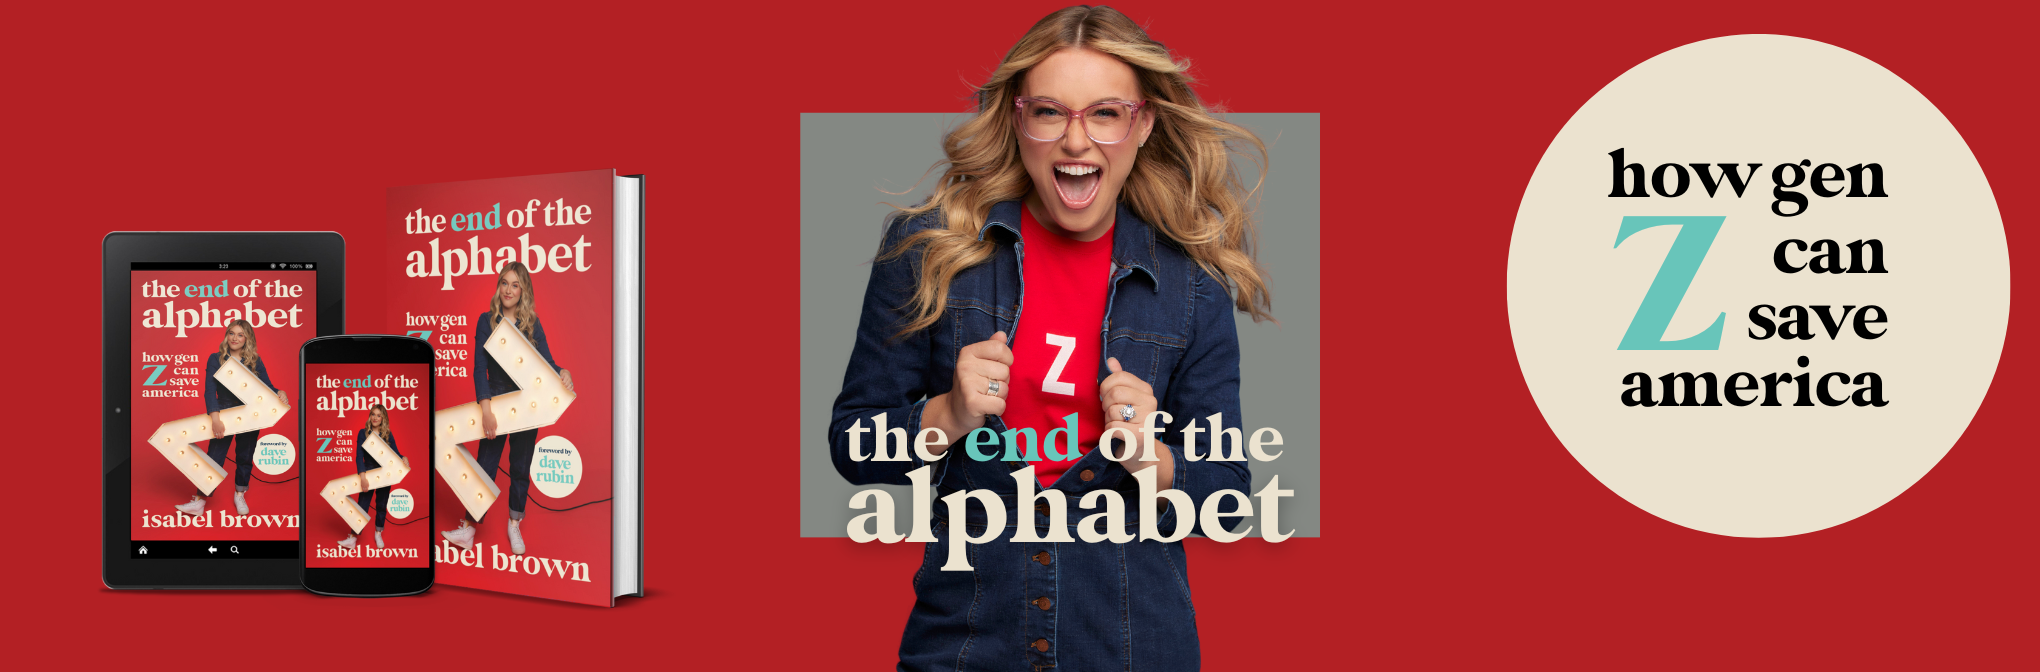 End-of-the-Alphabet-Graphics-2040-x-672-px.png